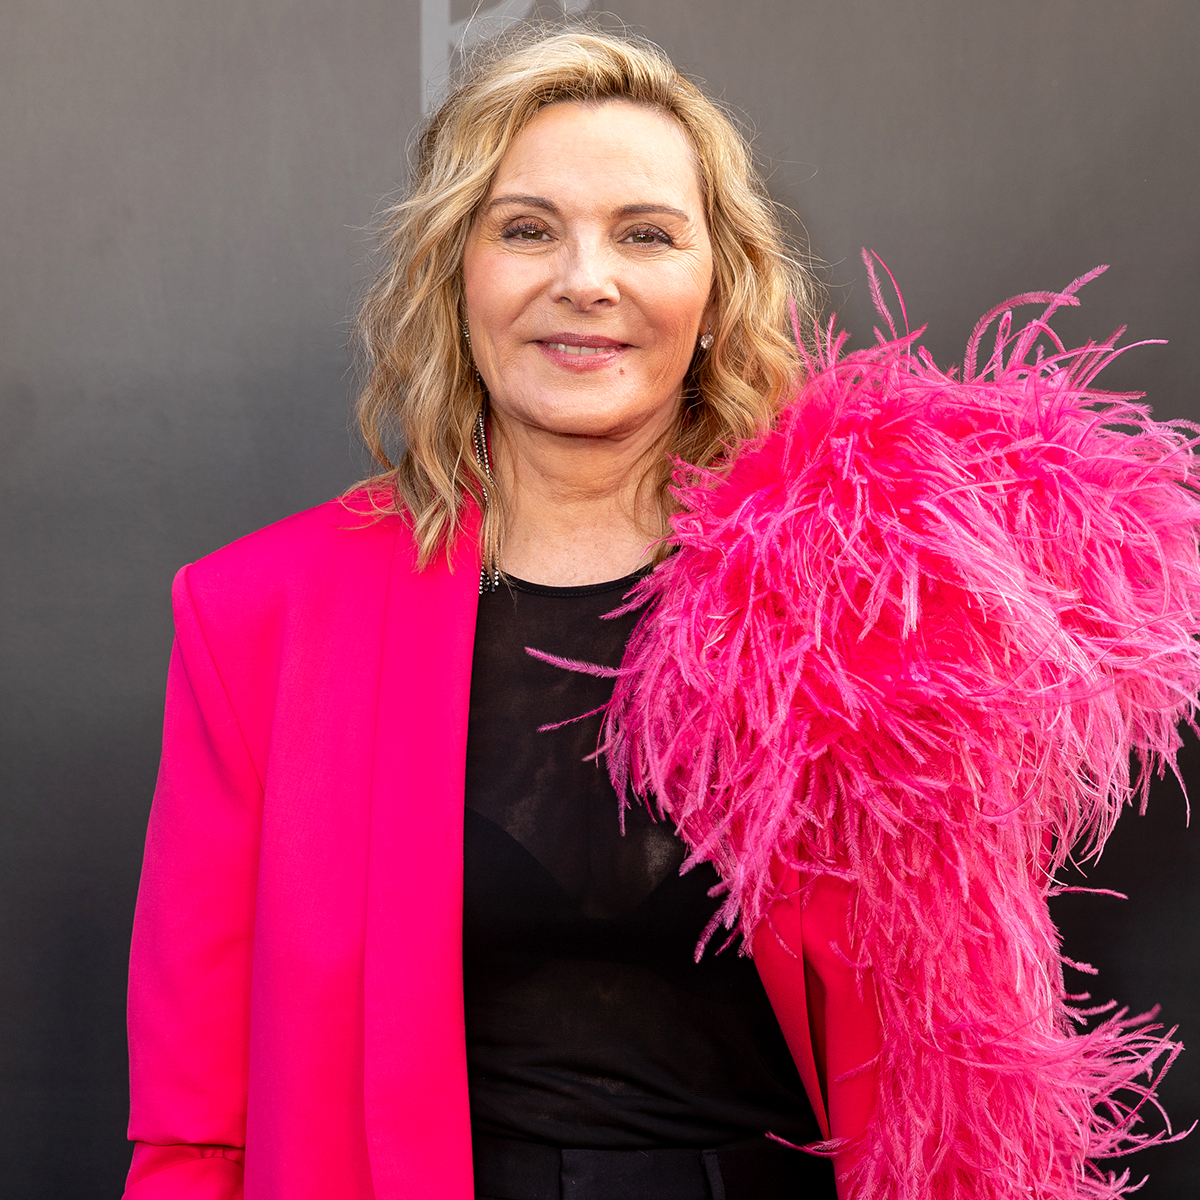 Kim Cattrall Joins Olehenriksen As Face Of New Body Care Campaign